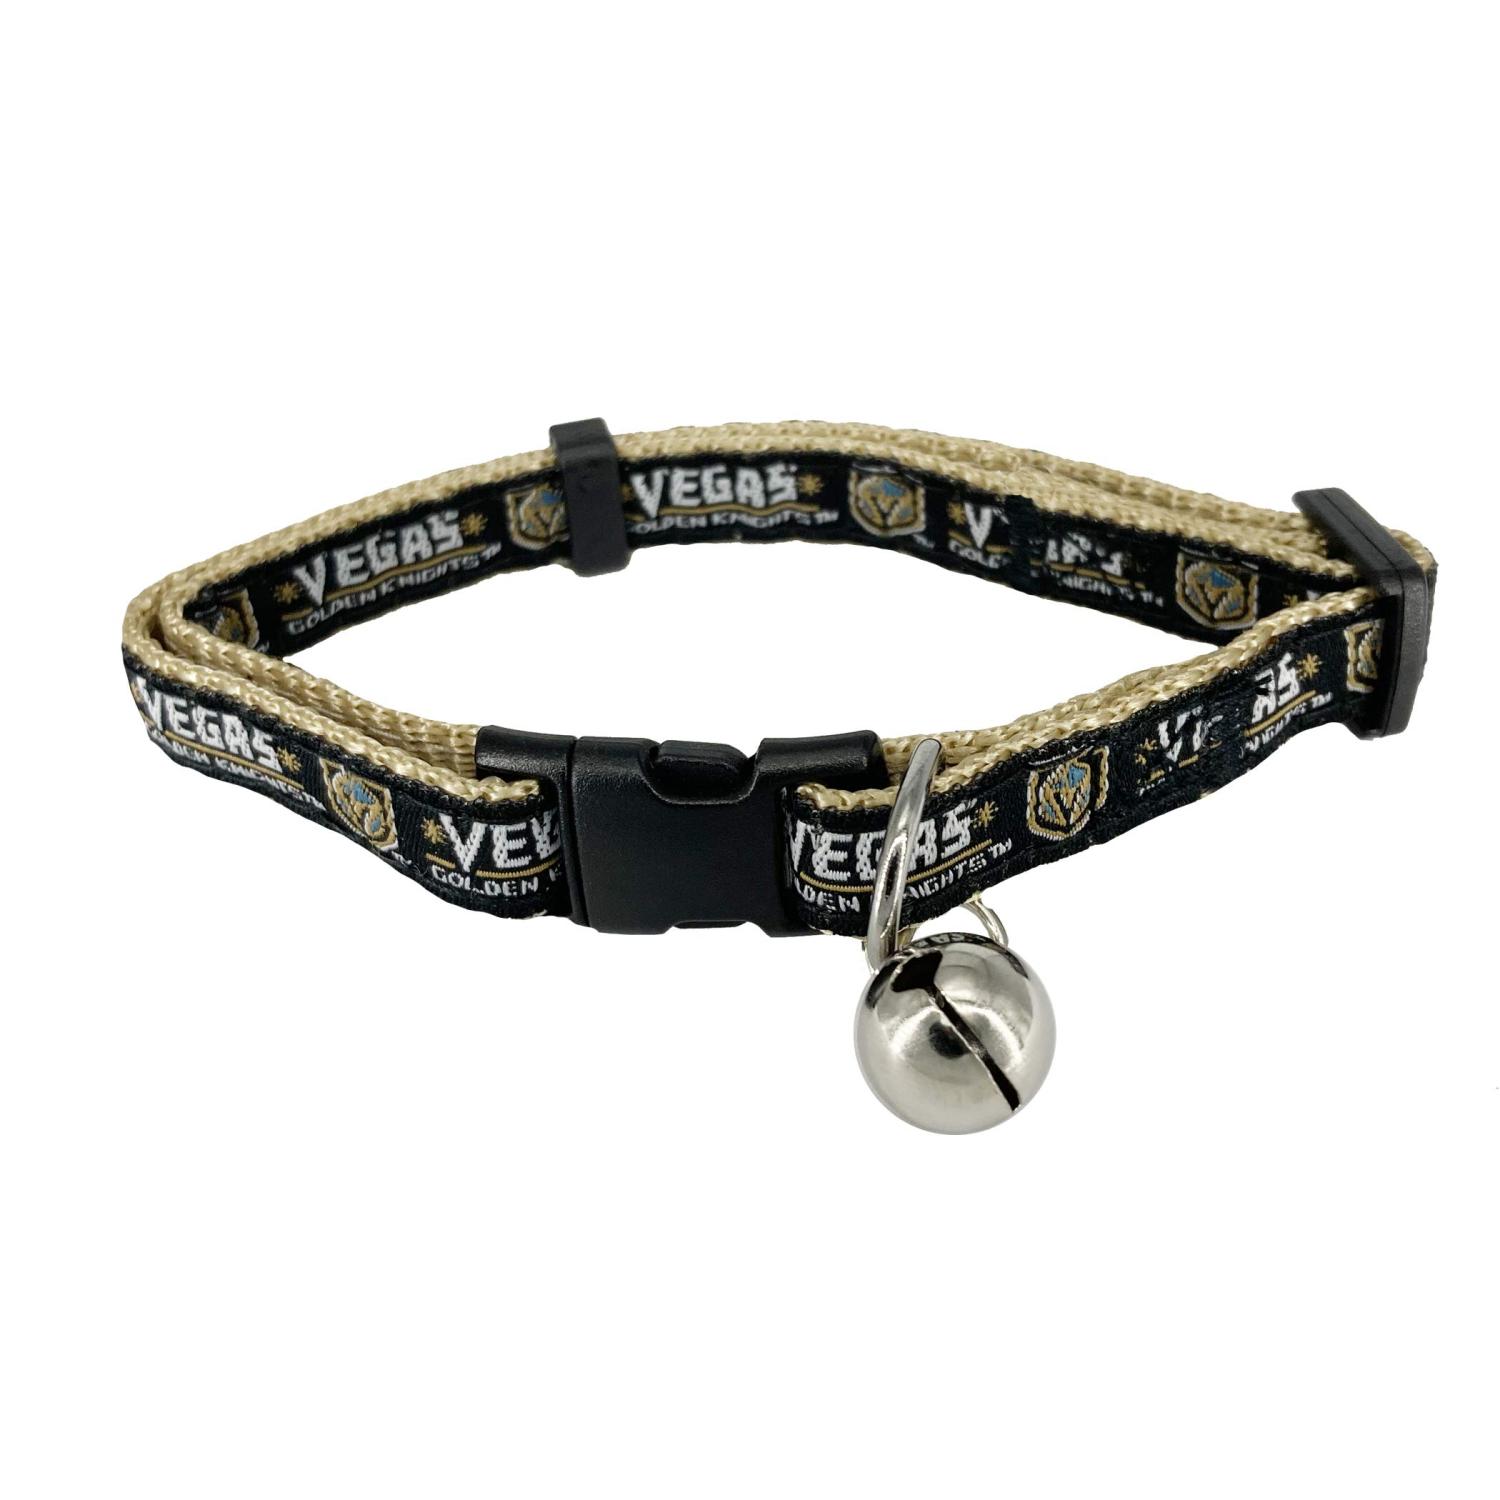 Pets First NHL LAS Vegas Knights CAT Collar Adjustable Break-Away Collar  for Cats with Licensed Team Name & Logo. Cute & Fashionable Hockey Sports Cat  Collar with Metal Jingle Bell